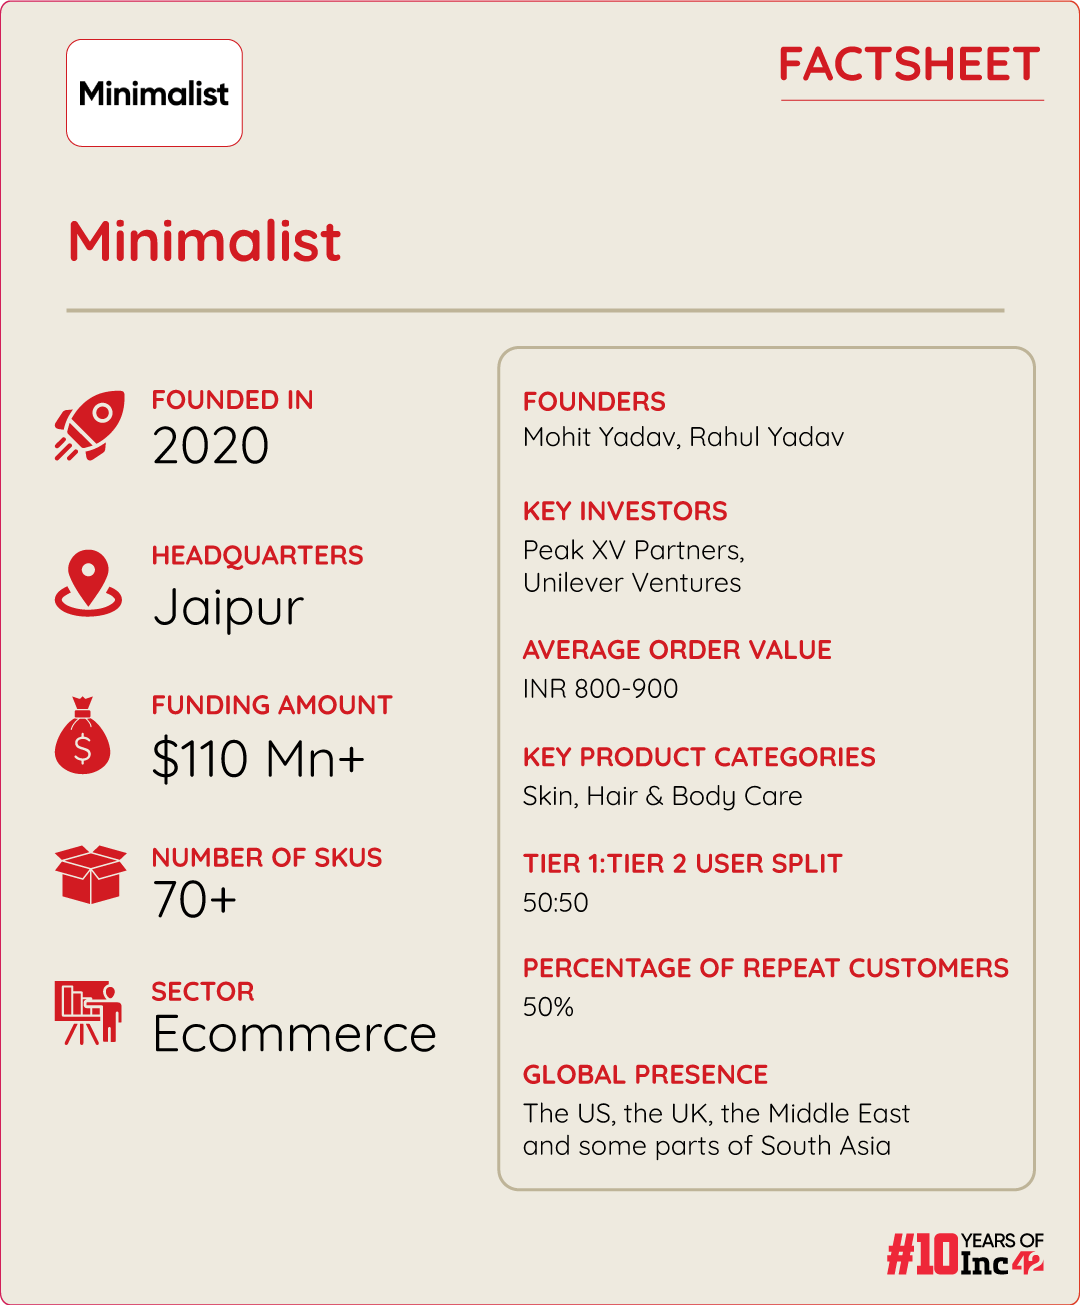 In July 2021, Minimalist raised INR 110 Cr ($15 Mn) in Series A, led by Peak XV Partners (formerly Sequoia Capital India), with participation from Unilever Ventures 